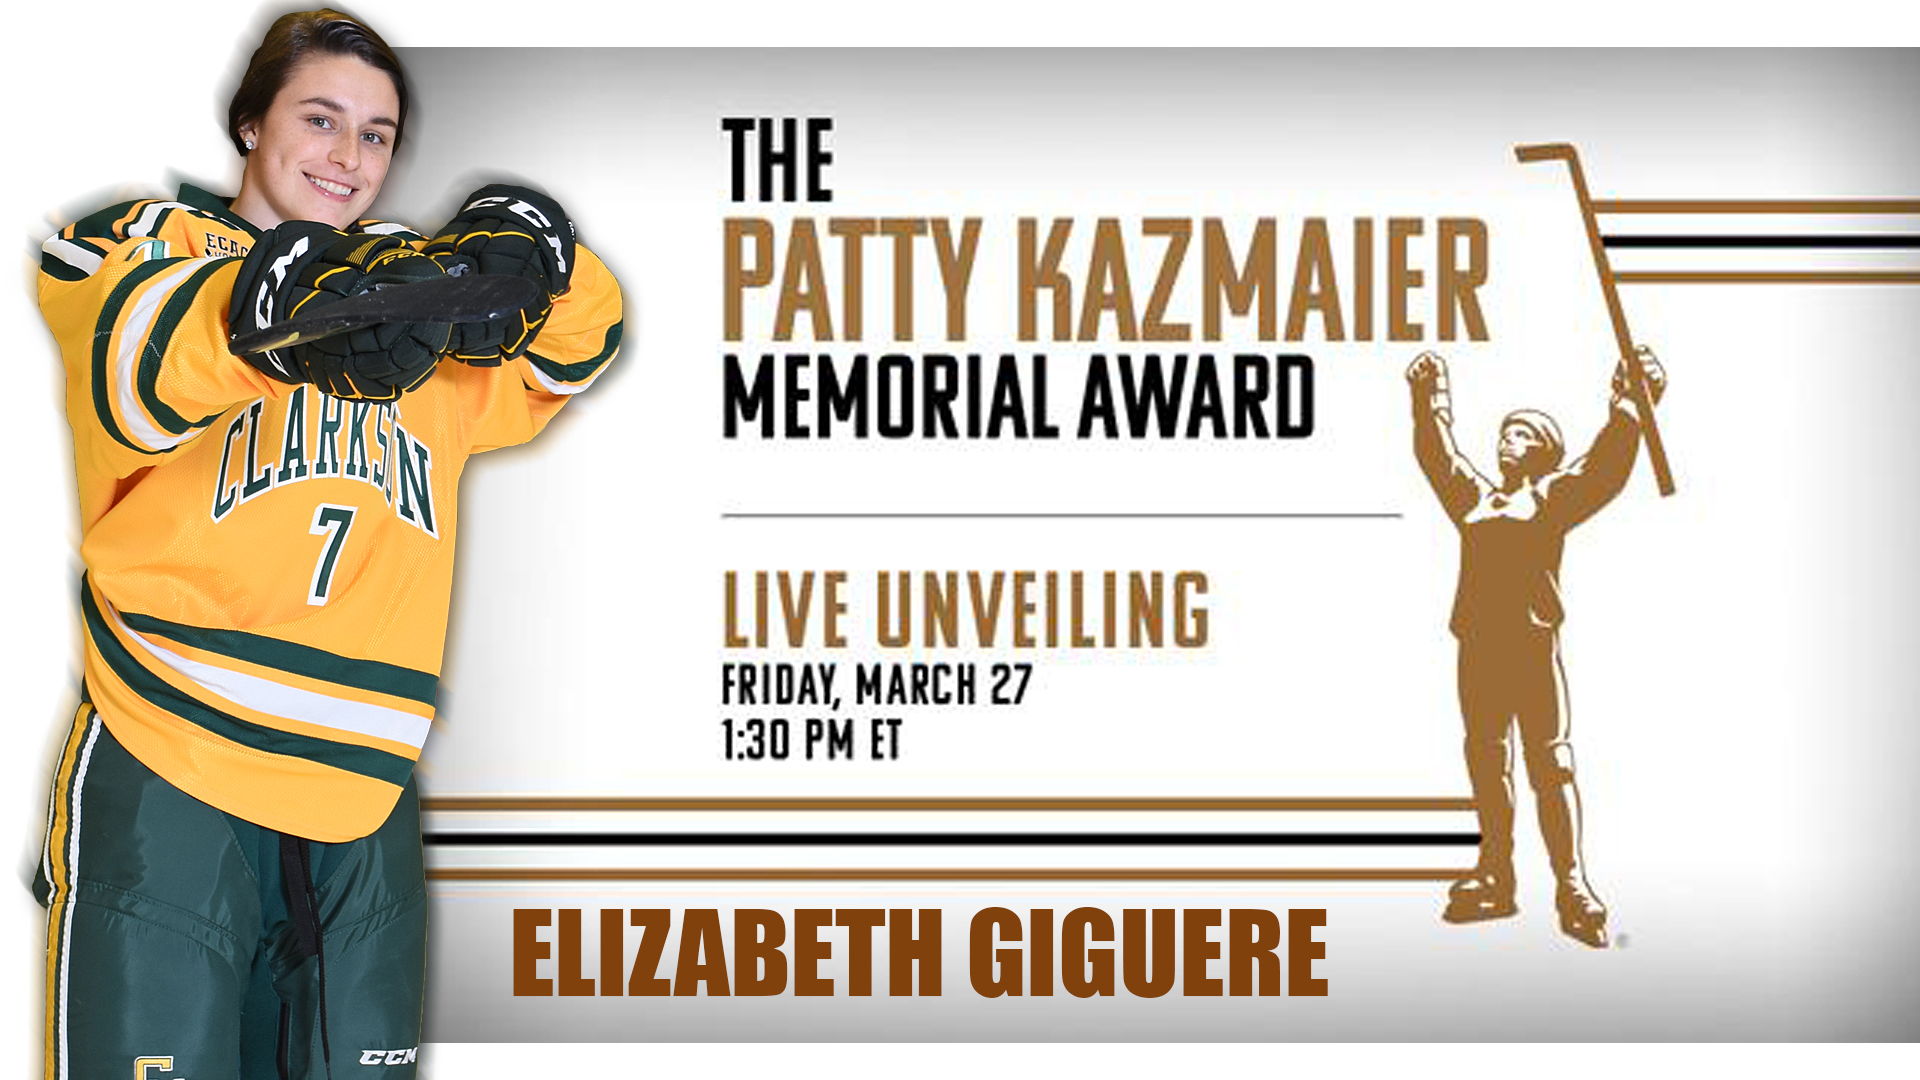 Giguere Finalist for Kazmaier Award to be Announced Live at 1:30 Today